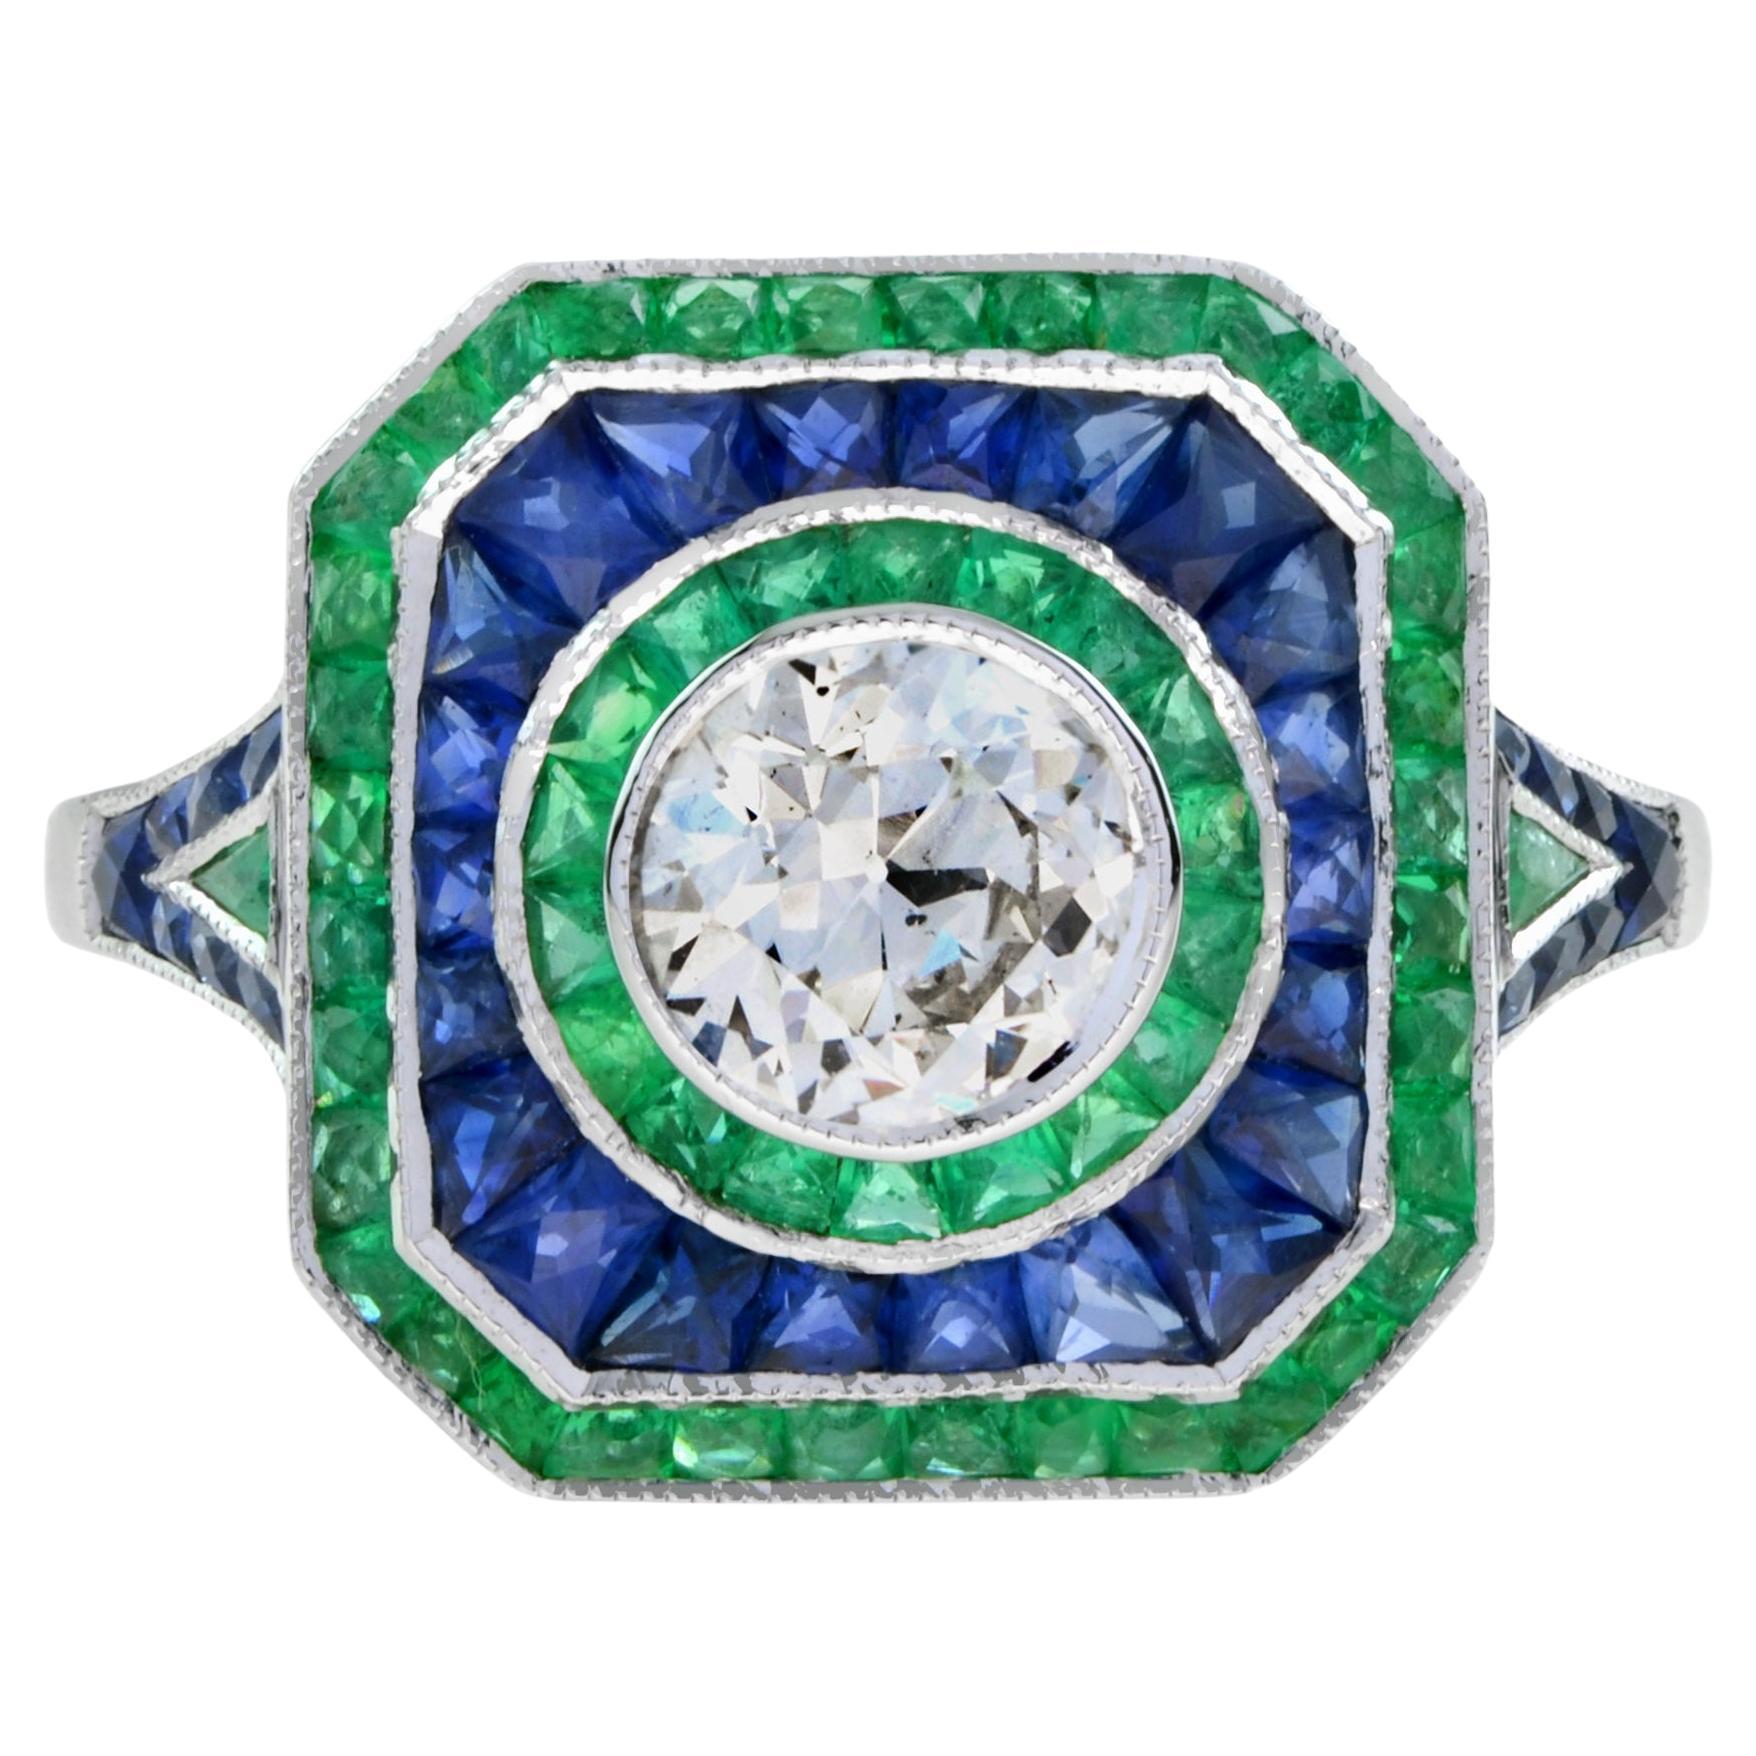 GIA Certified Old Cut Diamond with Sapphire Emerald Engagement Ring in 18k Gold